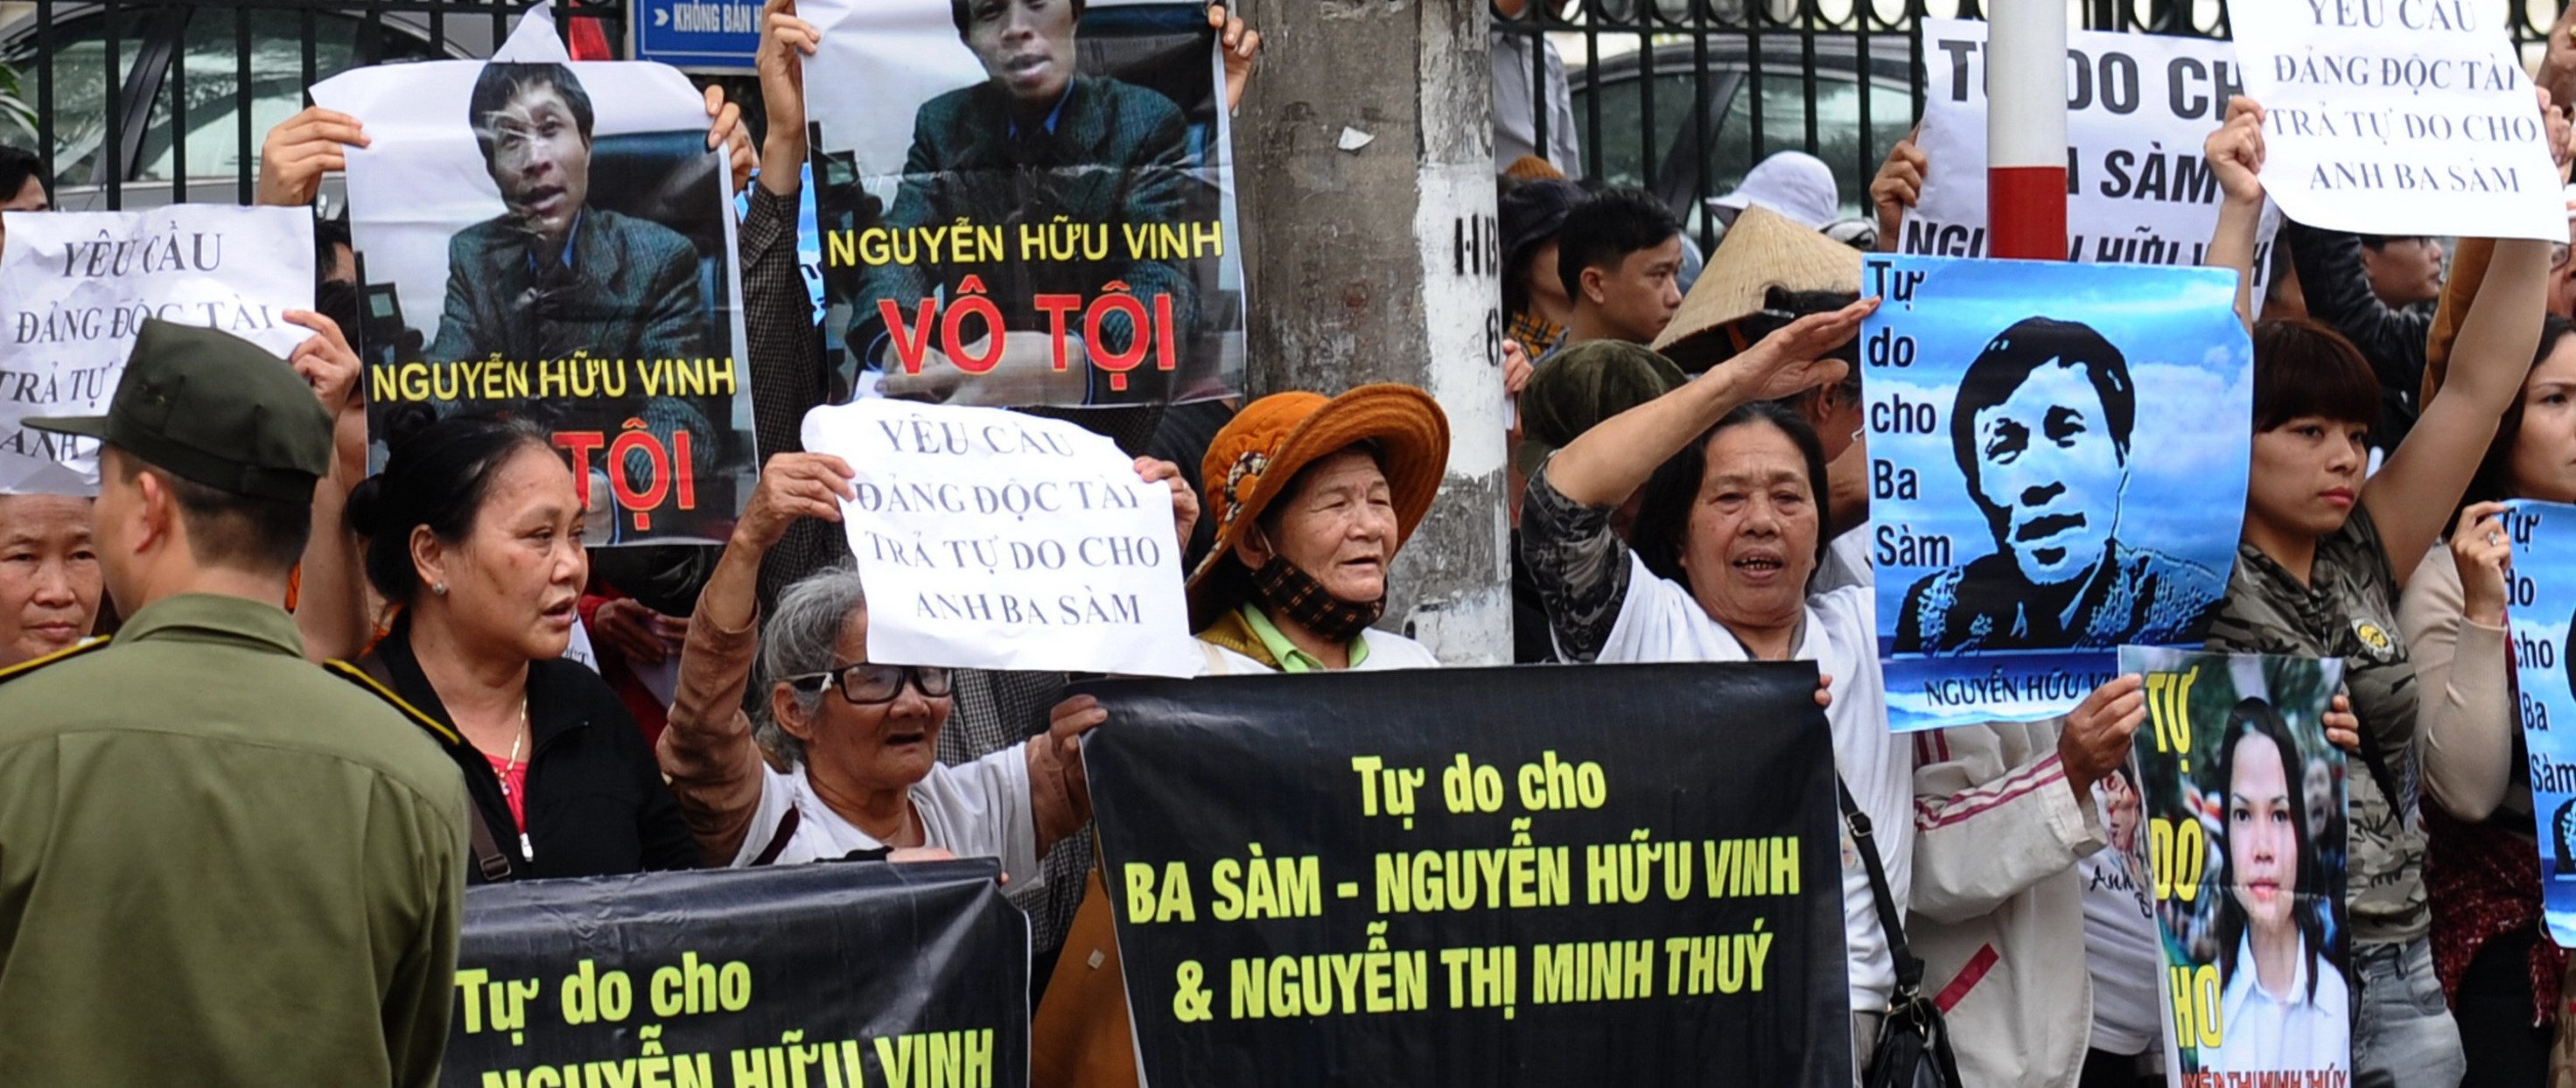 Vietnam, human rights defenders and activists, detention